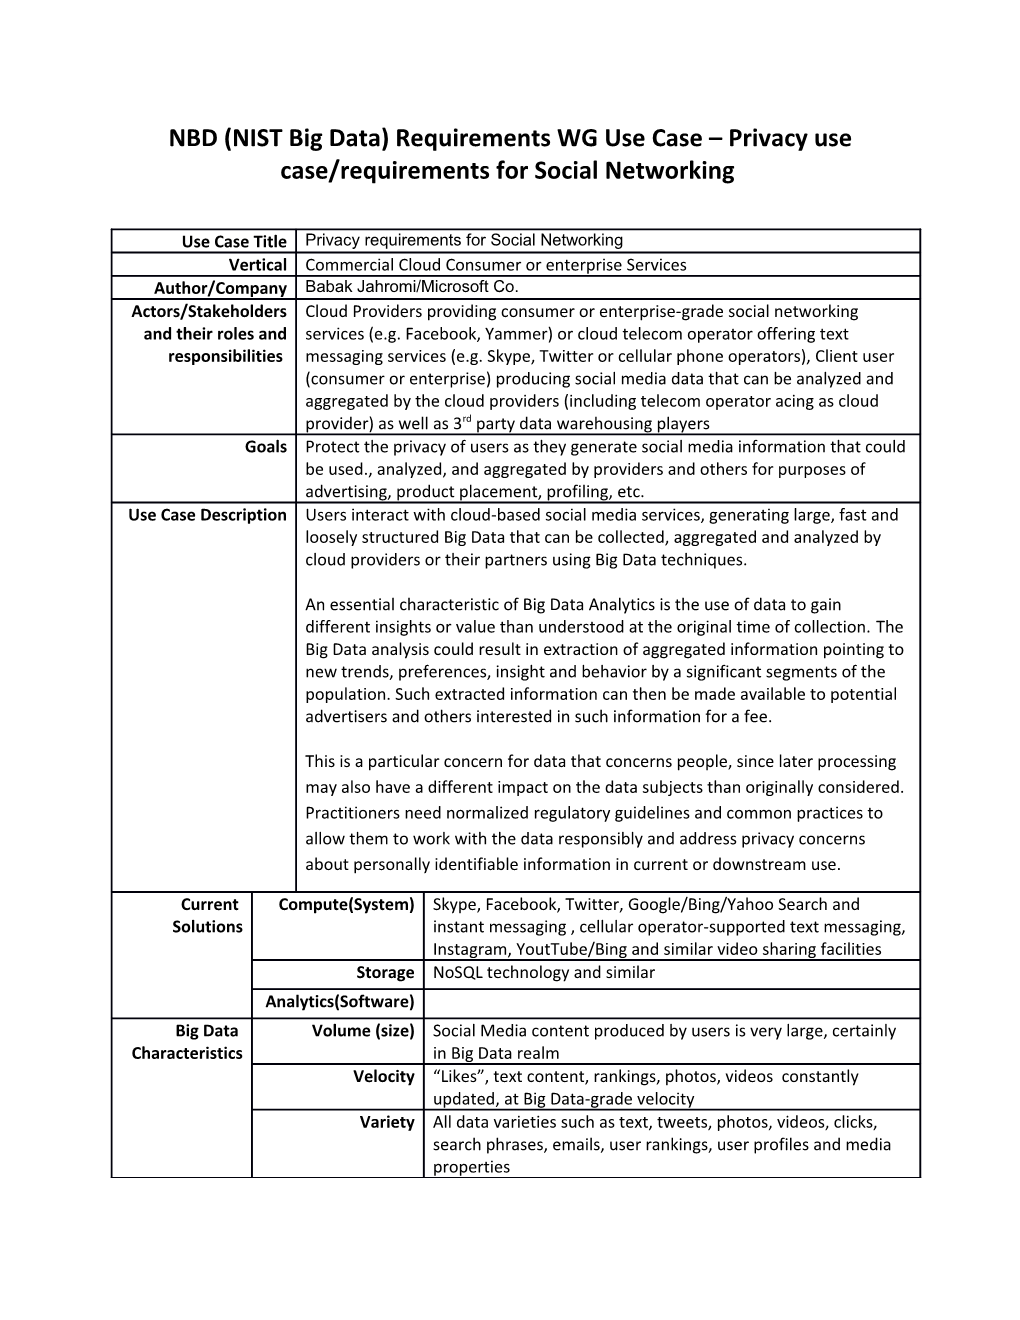 NBD(NIST Big Data) Requirements WG Use Case Privacy Use Case/Requirements for Social Networking